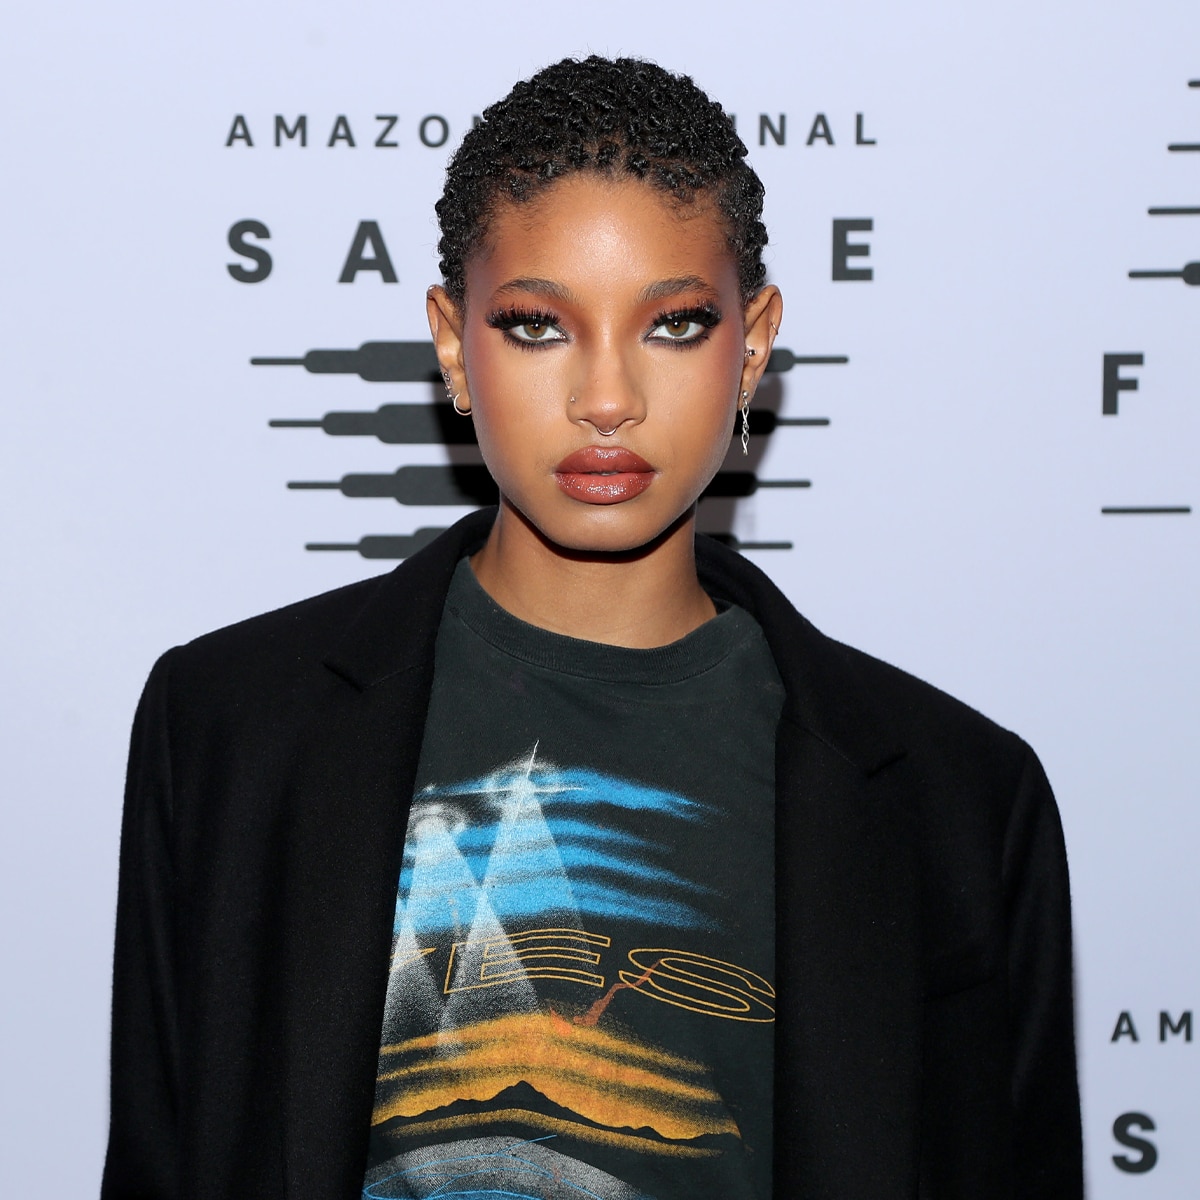 Willow Smith Does Preppy Punk in Miniskirt Leg Warmers  Combat Boots   Footwear News